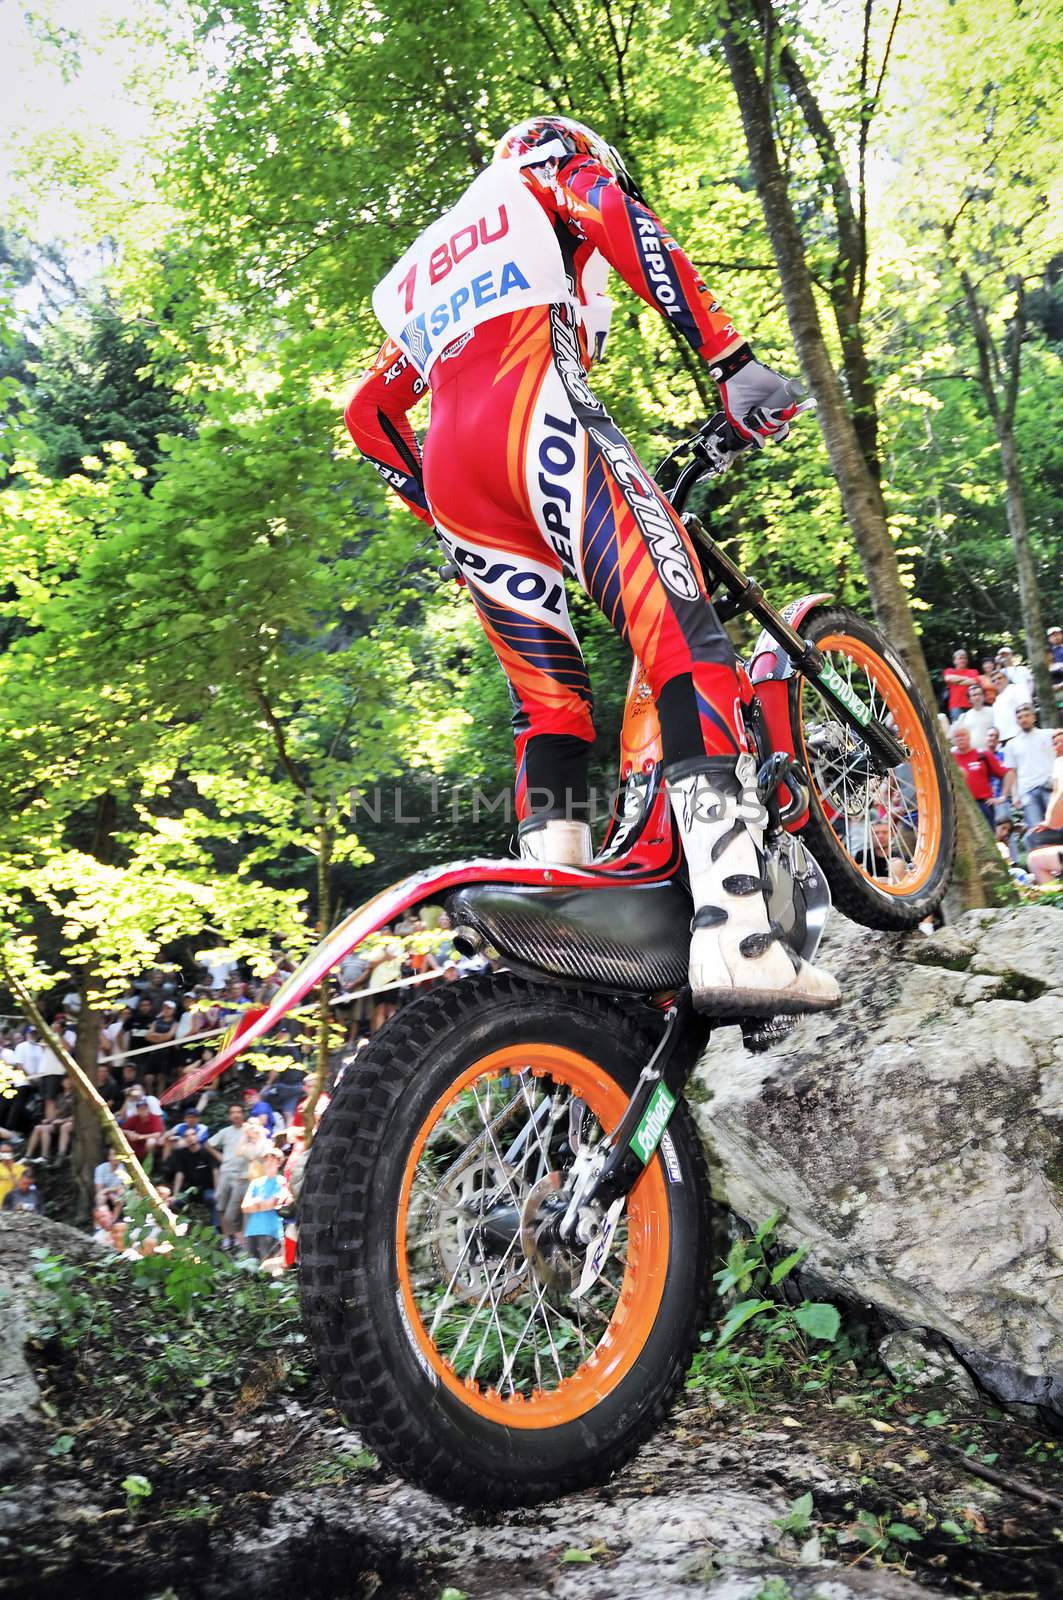 Toni Bou (the winner) in action